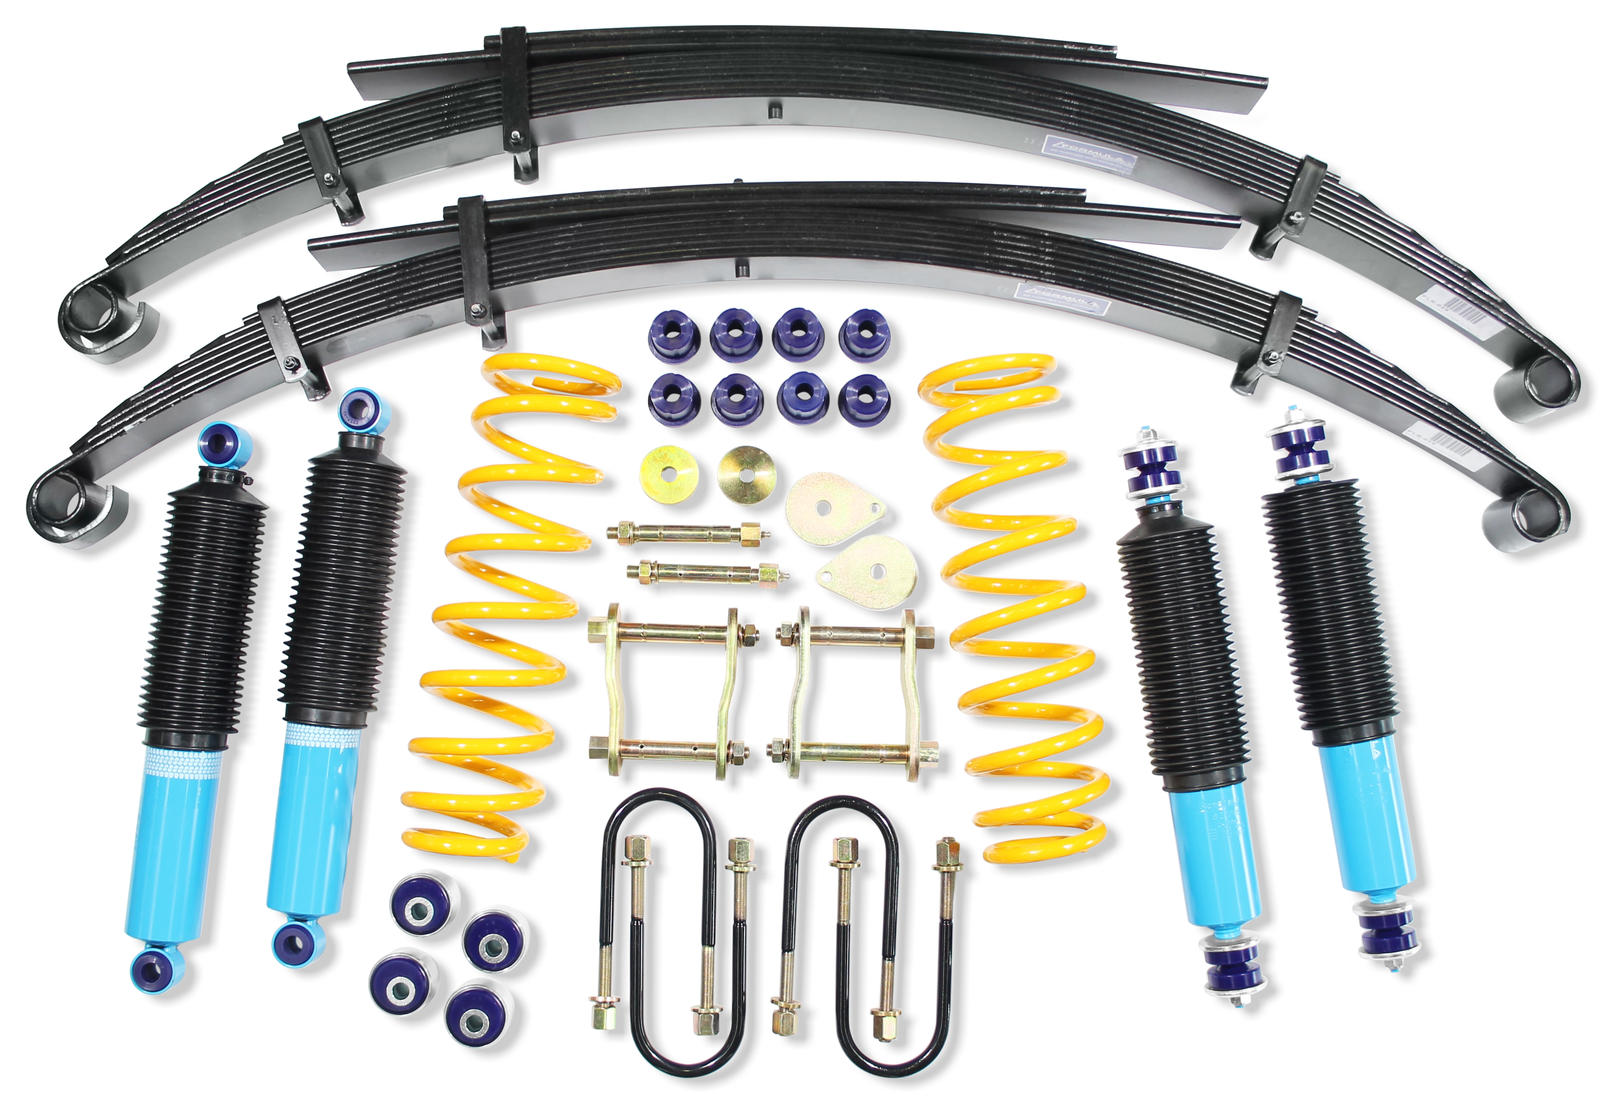 2 Inch 50mm Formula 4x4 Big Bore Lift Kit to suit Toyota Landcruiser 78, 79 Series from 2007-on